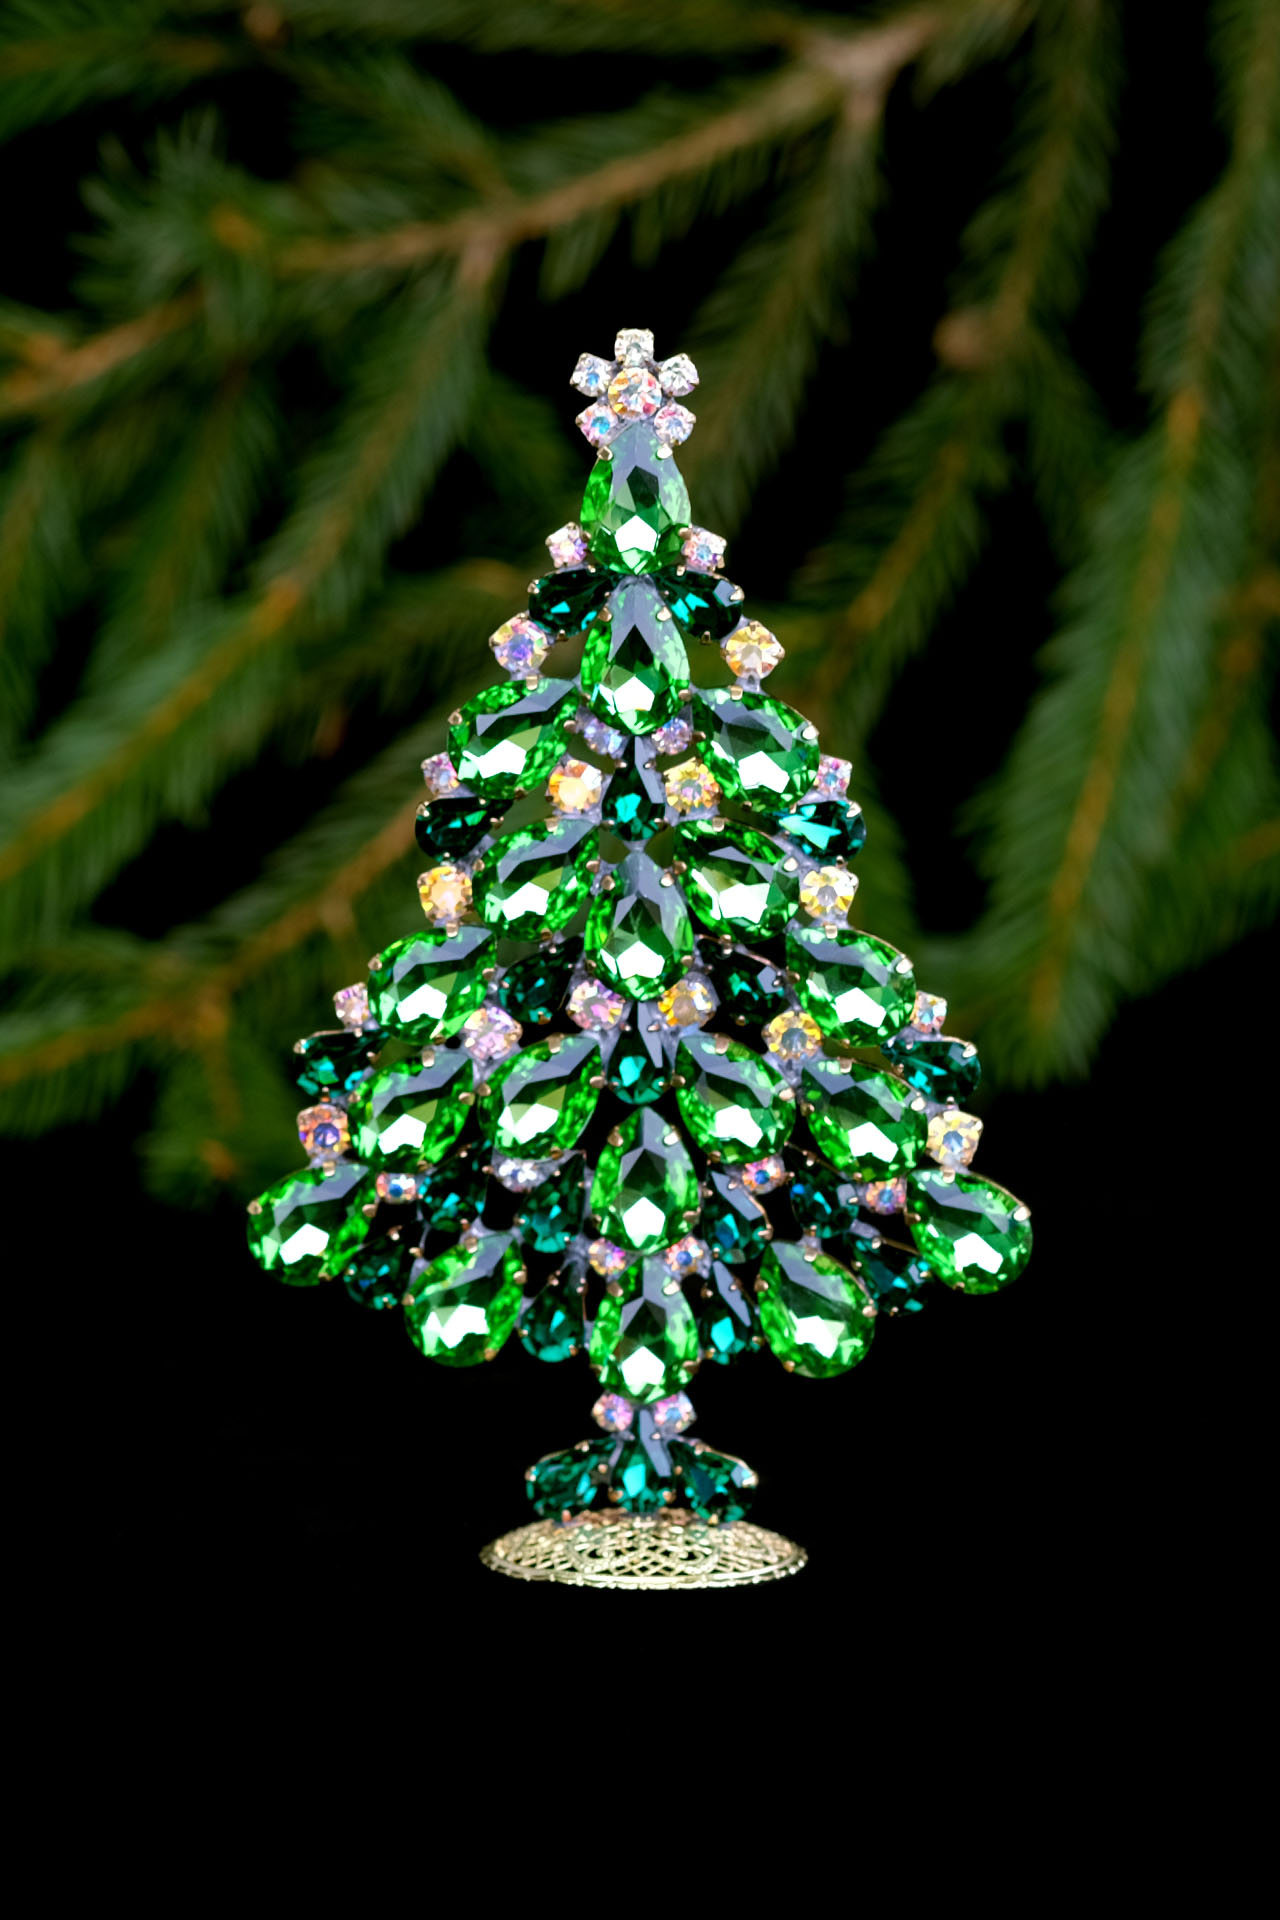 Delightful Xmas tree, handcrafted with ornament.